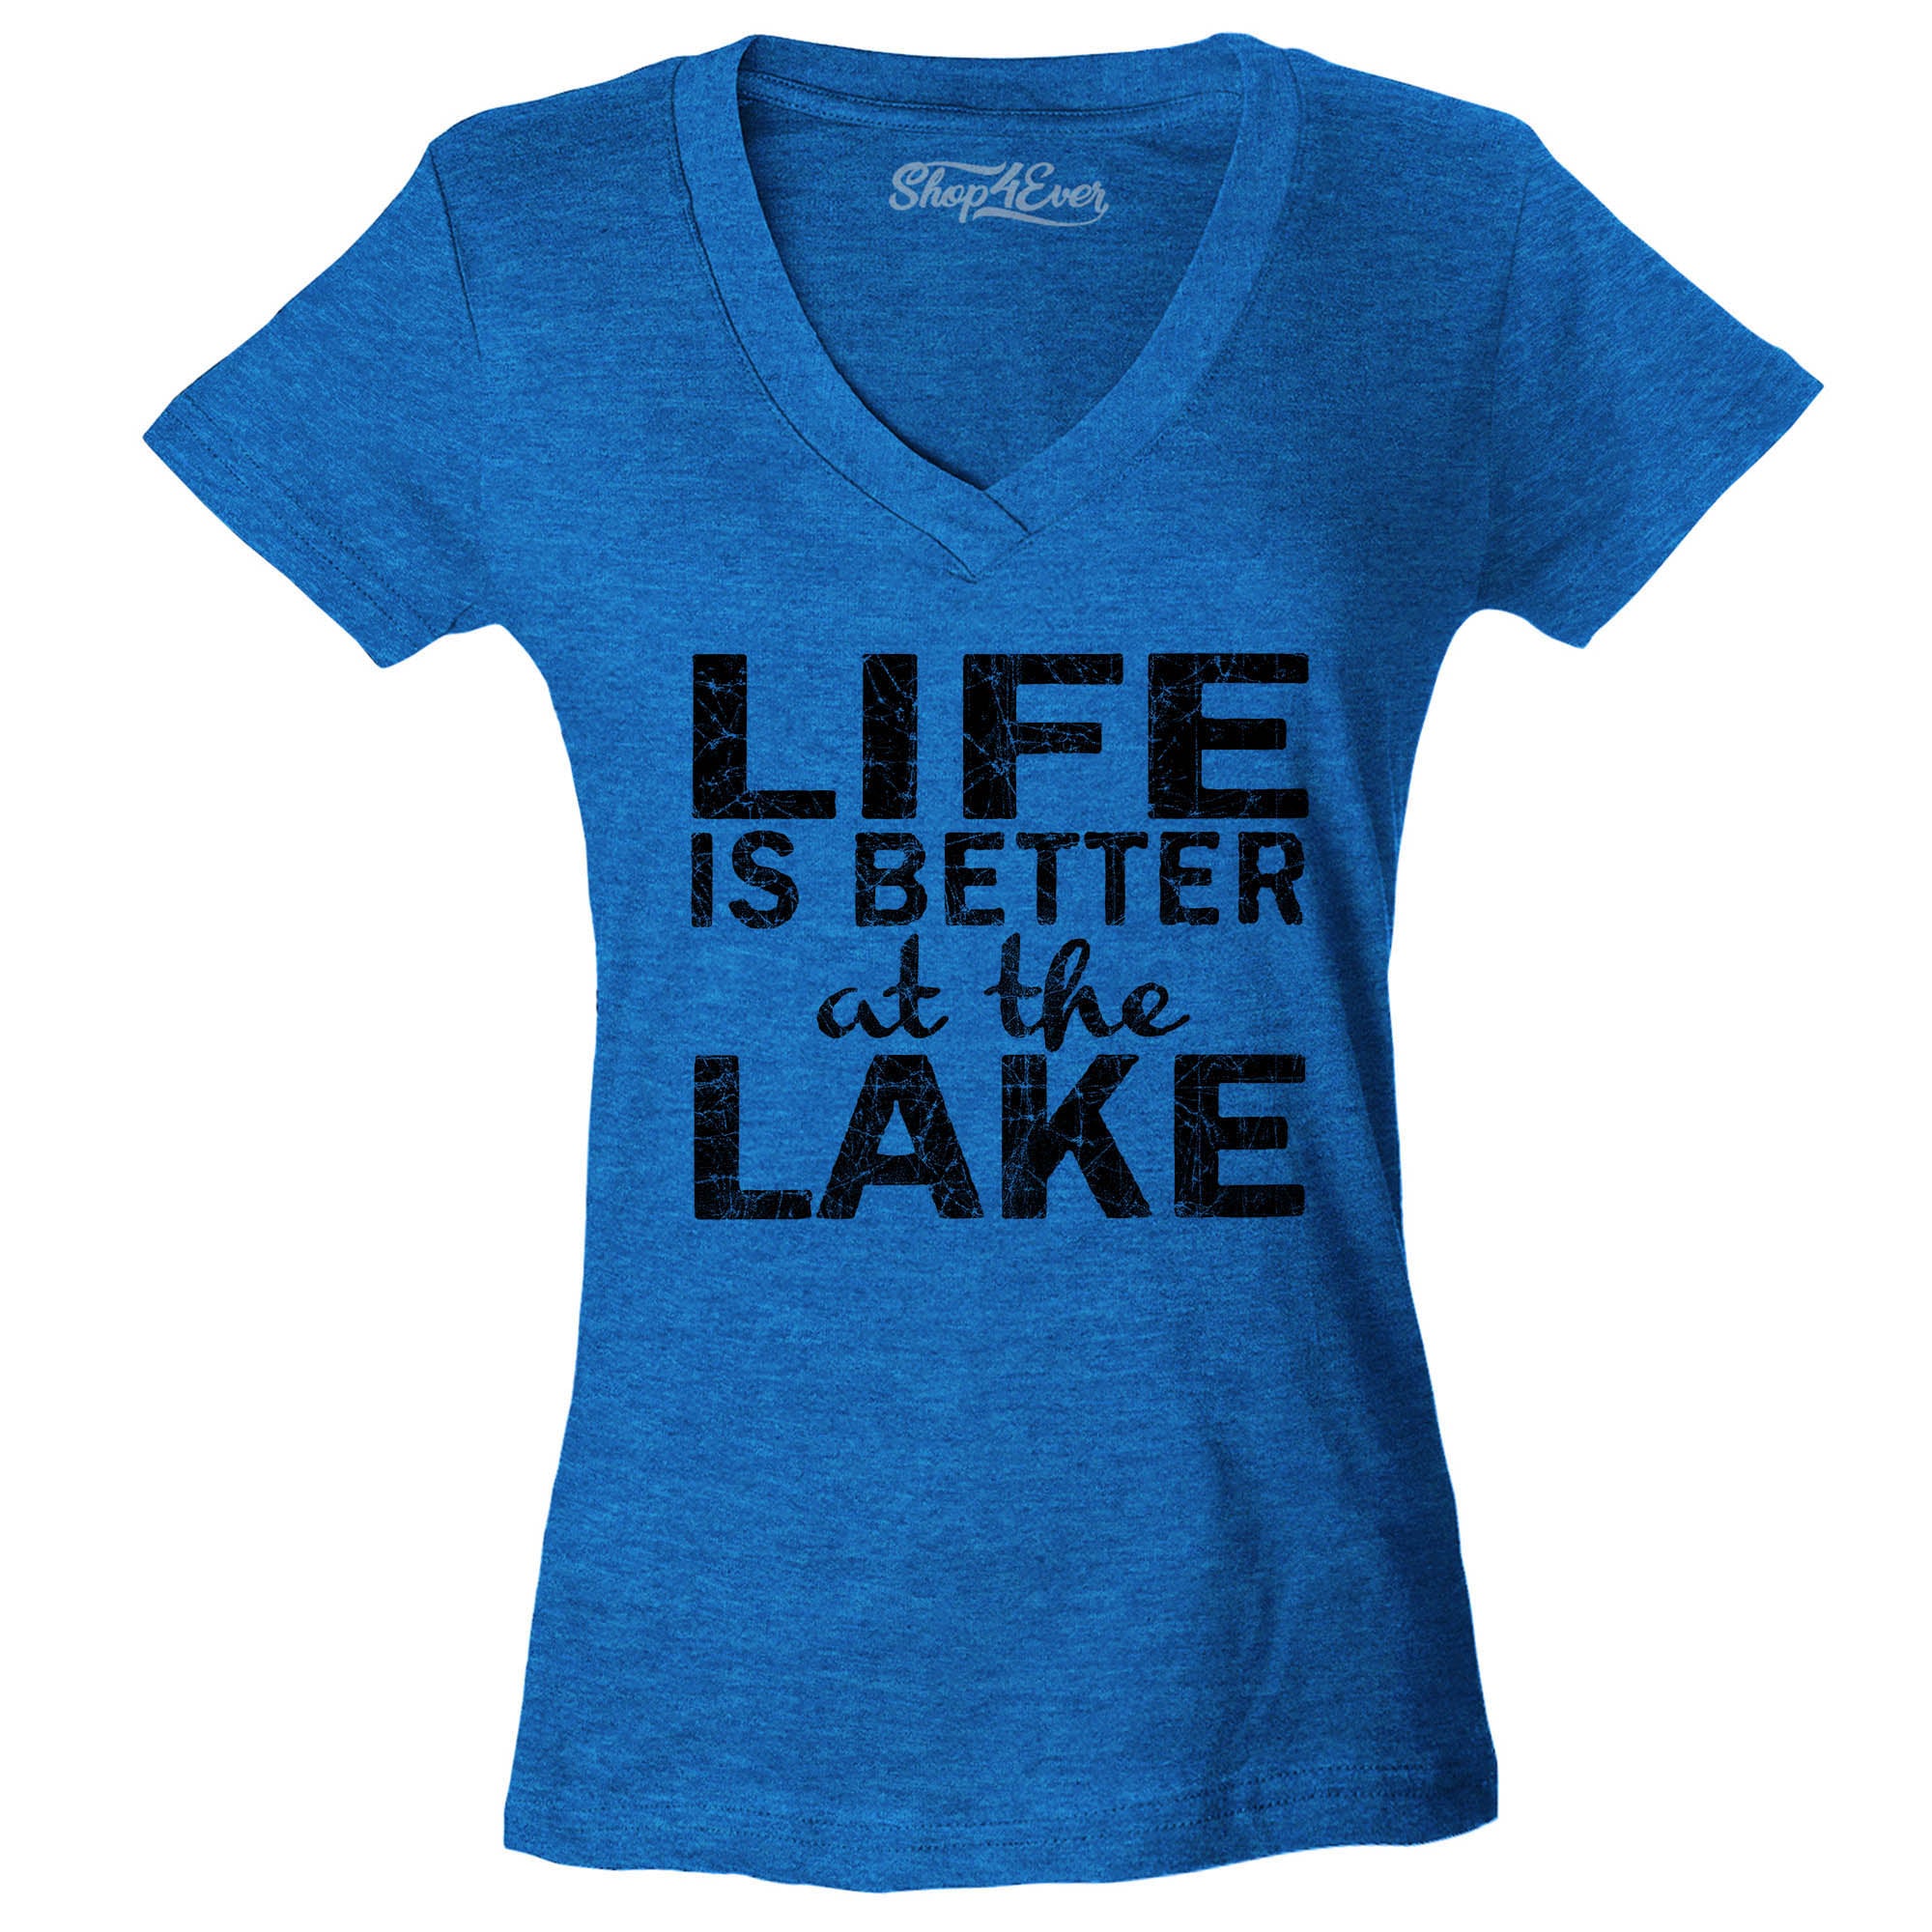 Life is Better at The Lake Black Women's V-Neck T-Shirt Sayings Shirts Slim FIT